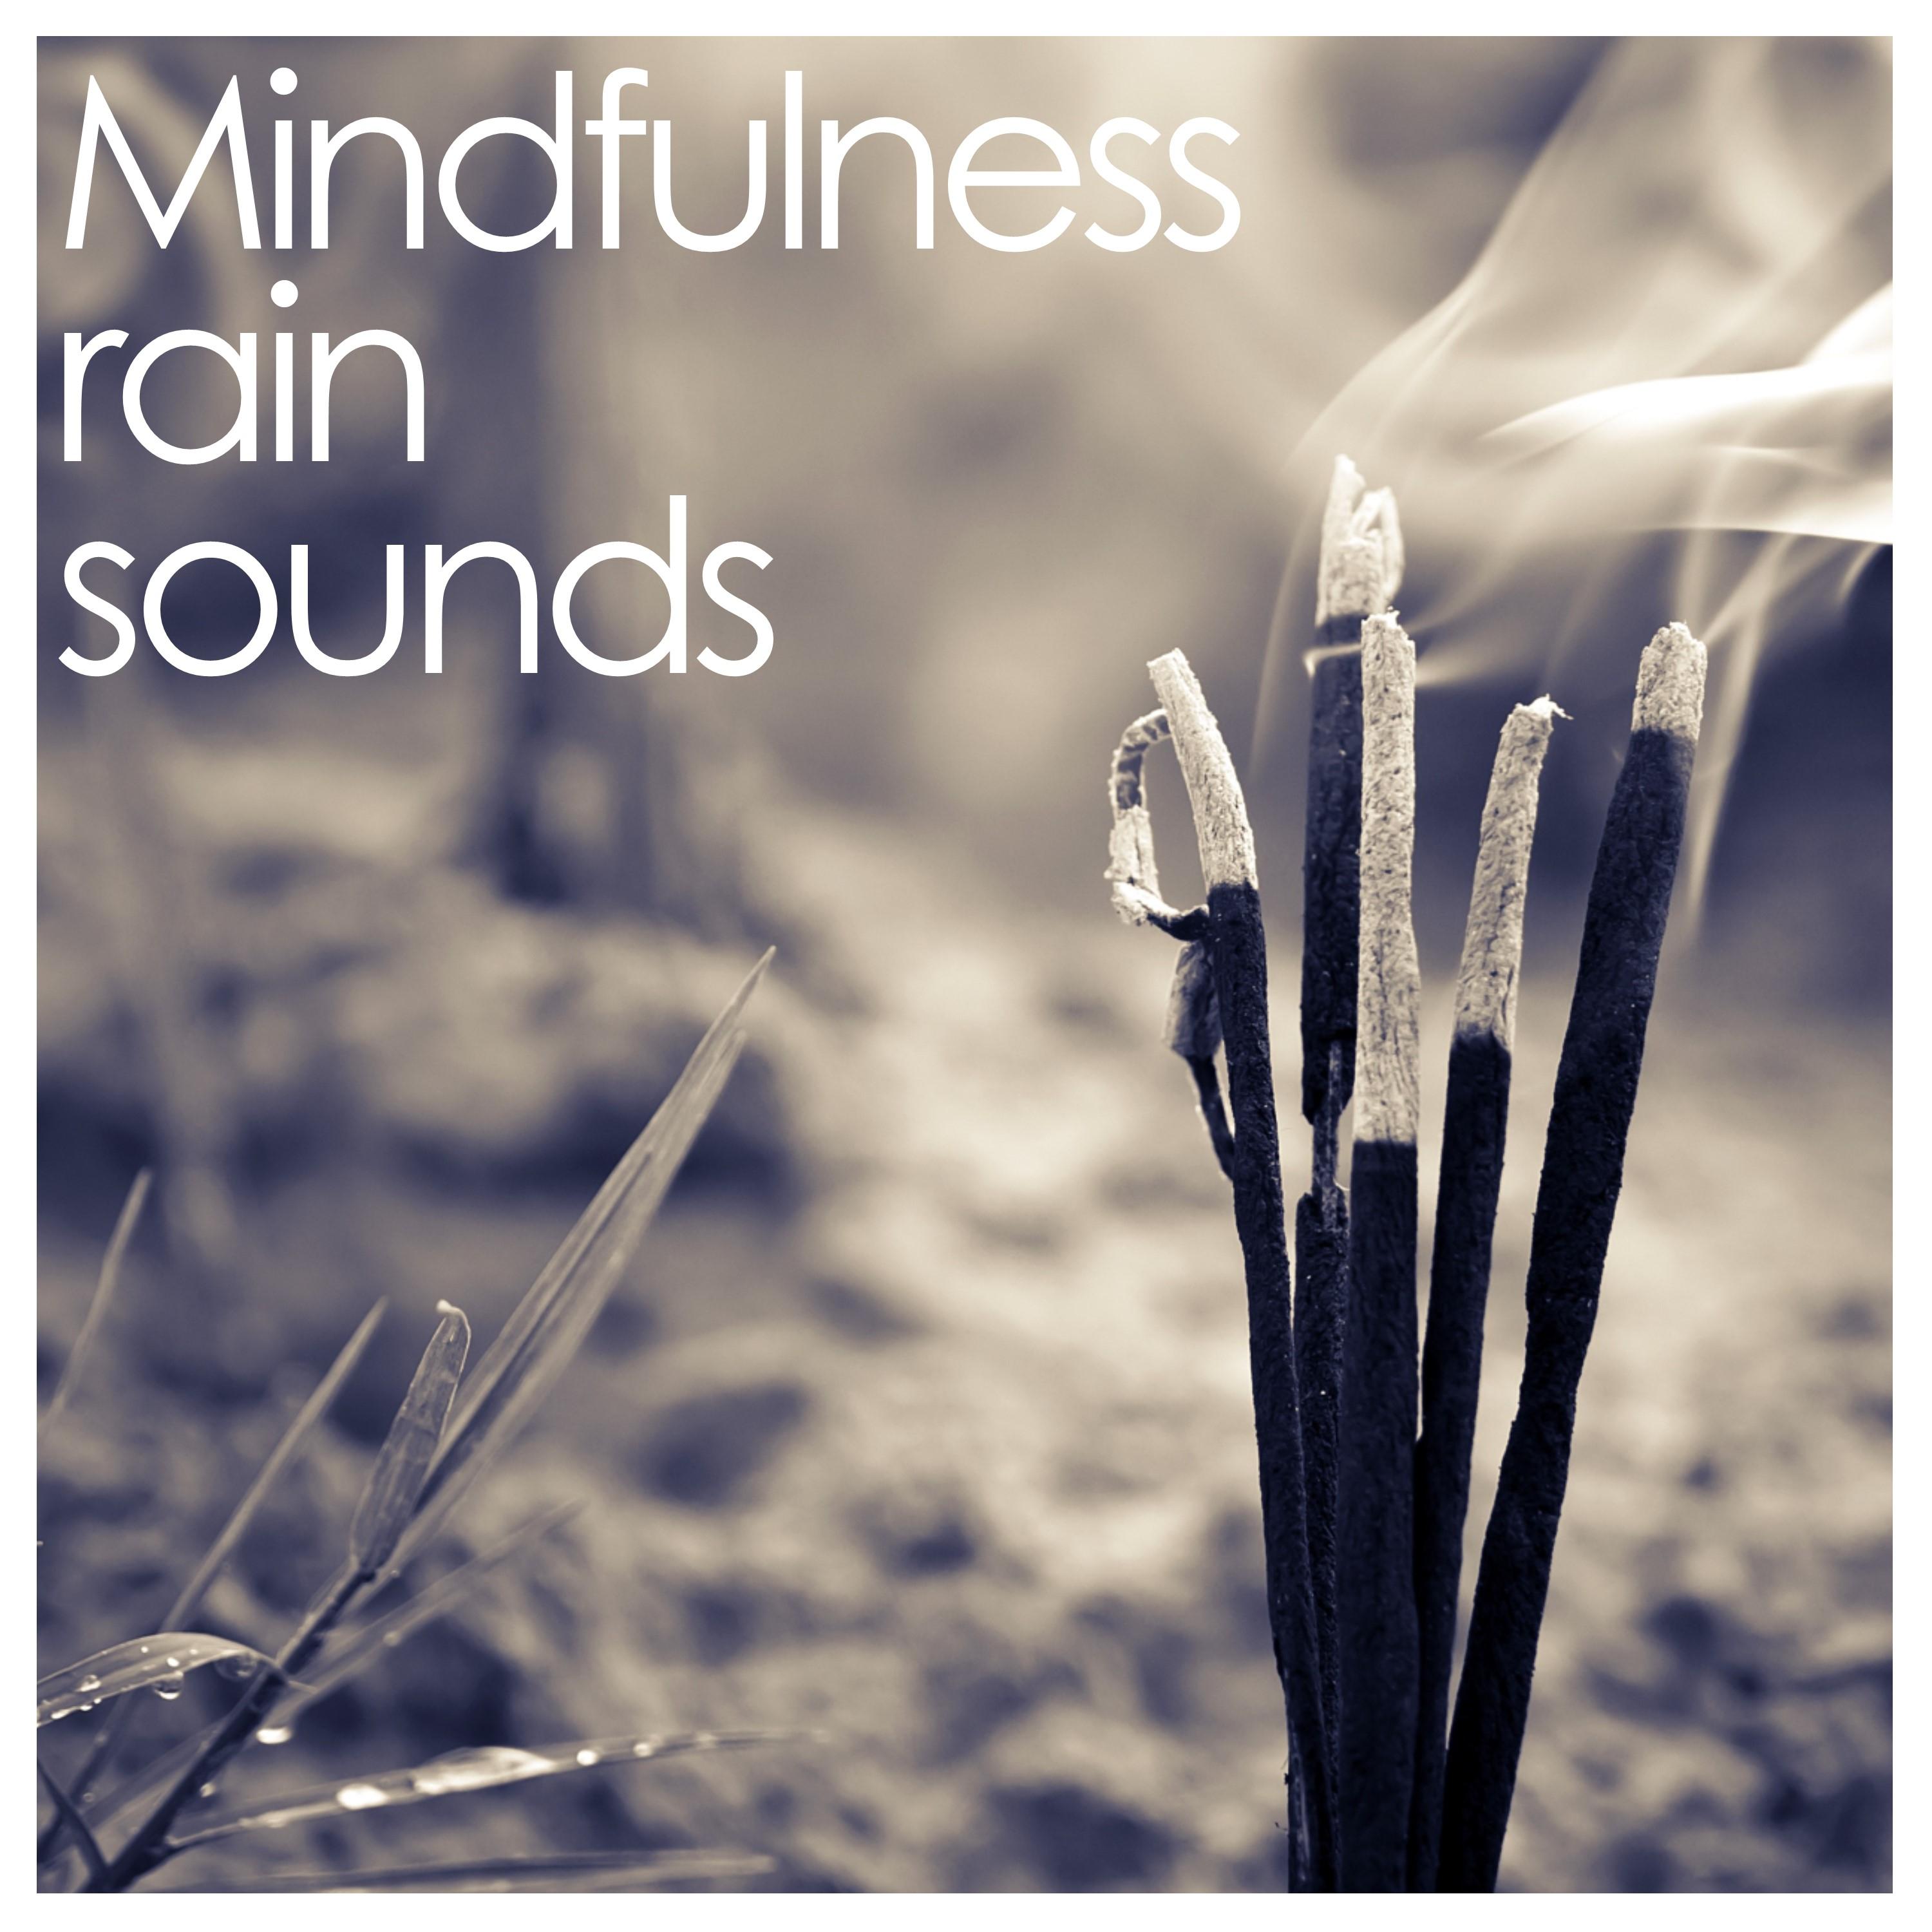 1 Hour Mindfulness Rain Sounds - White Noise Ambience for Relaxation and Meditation